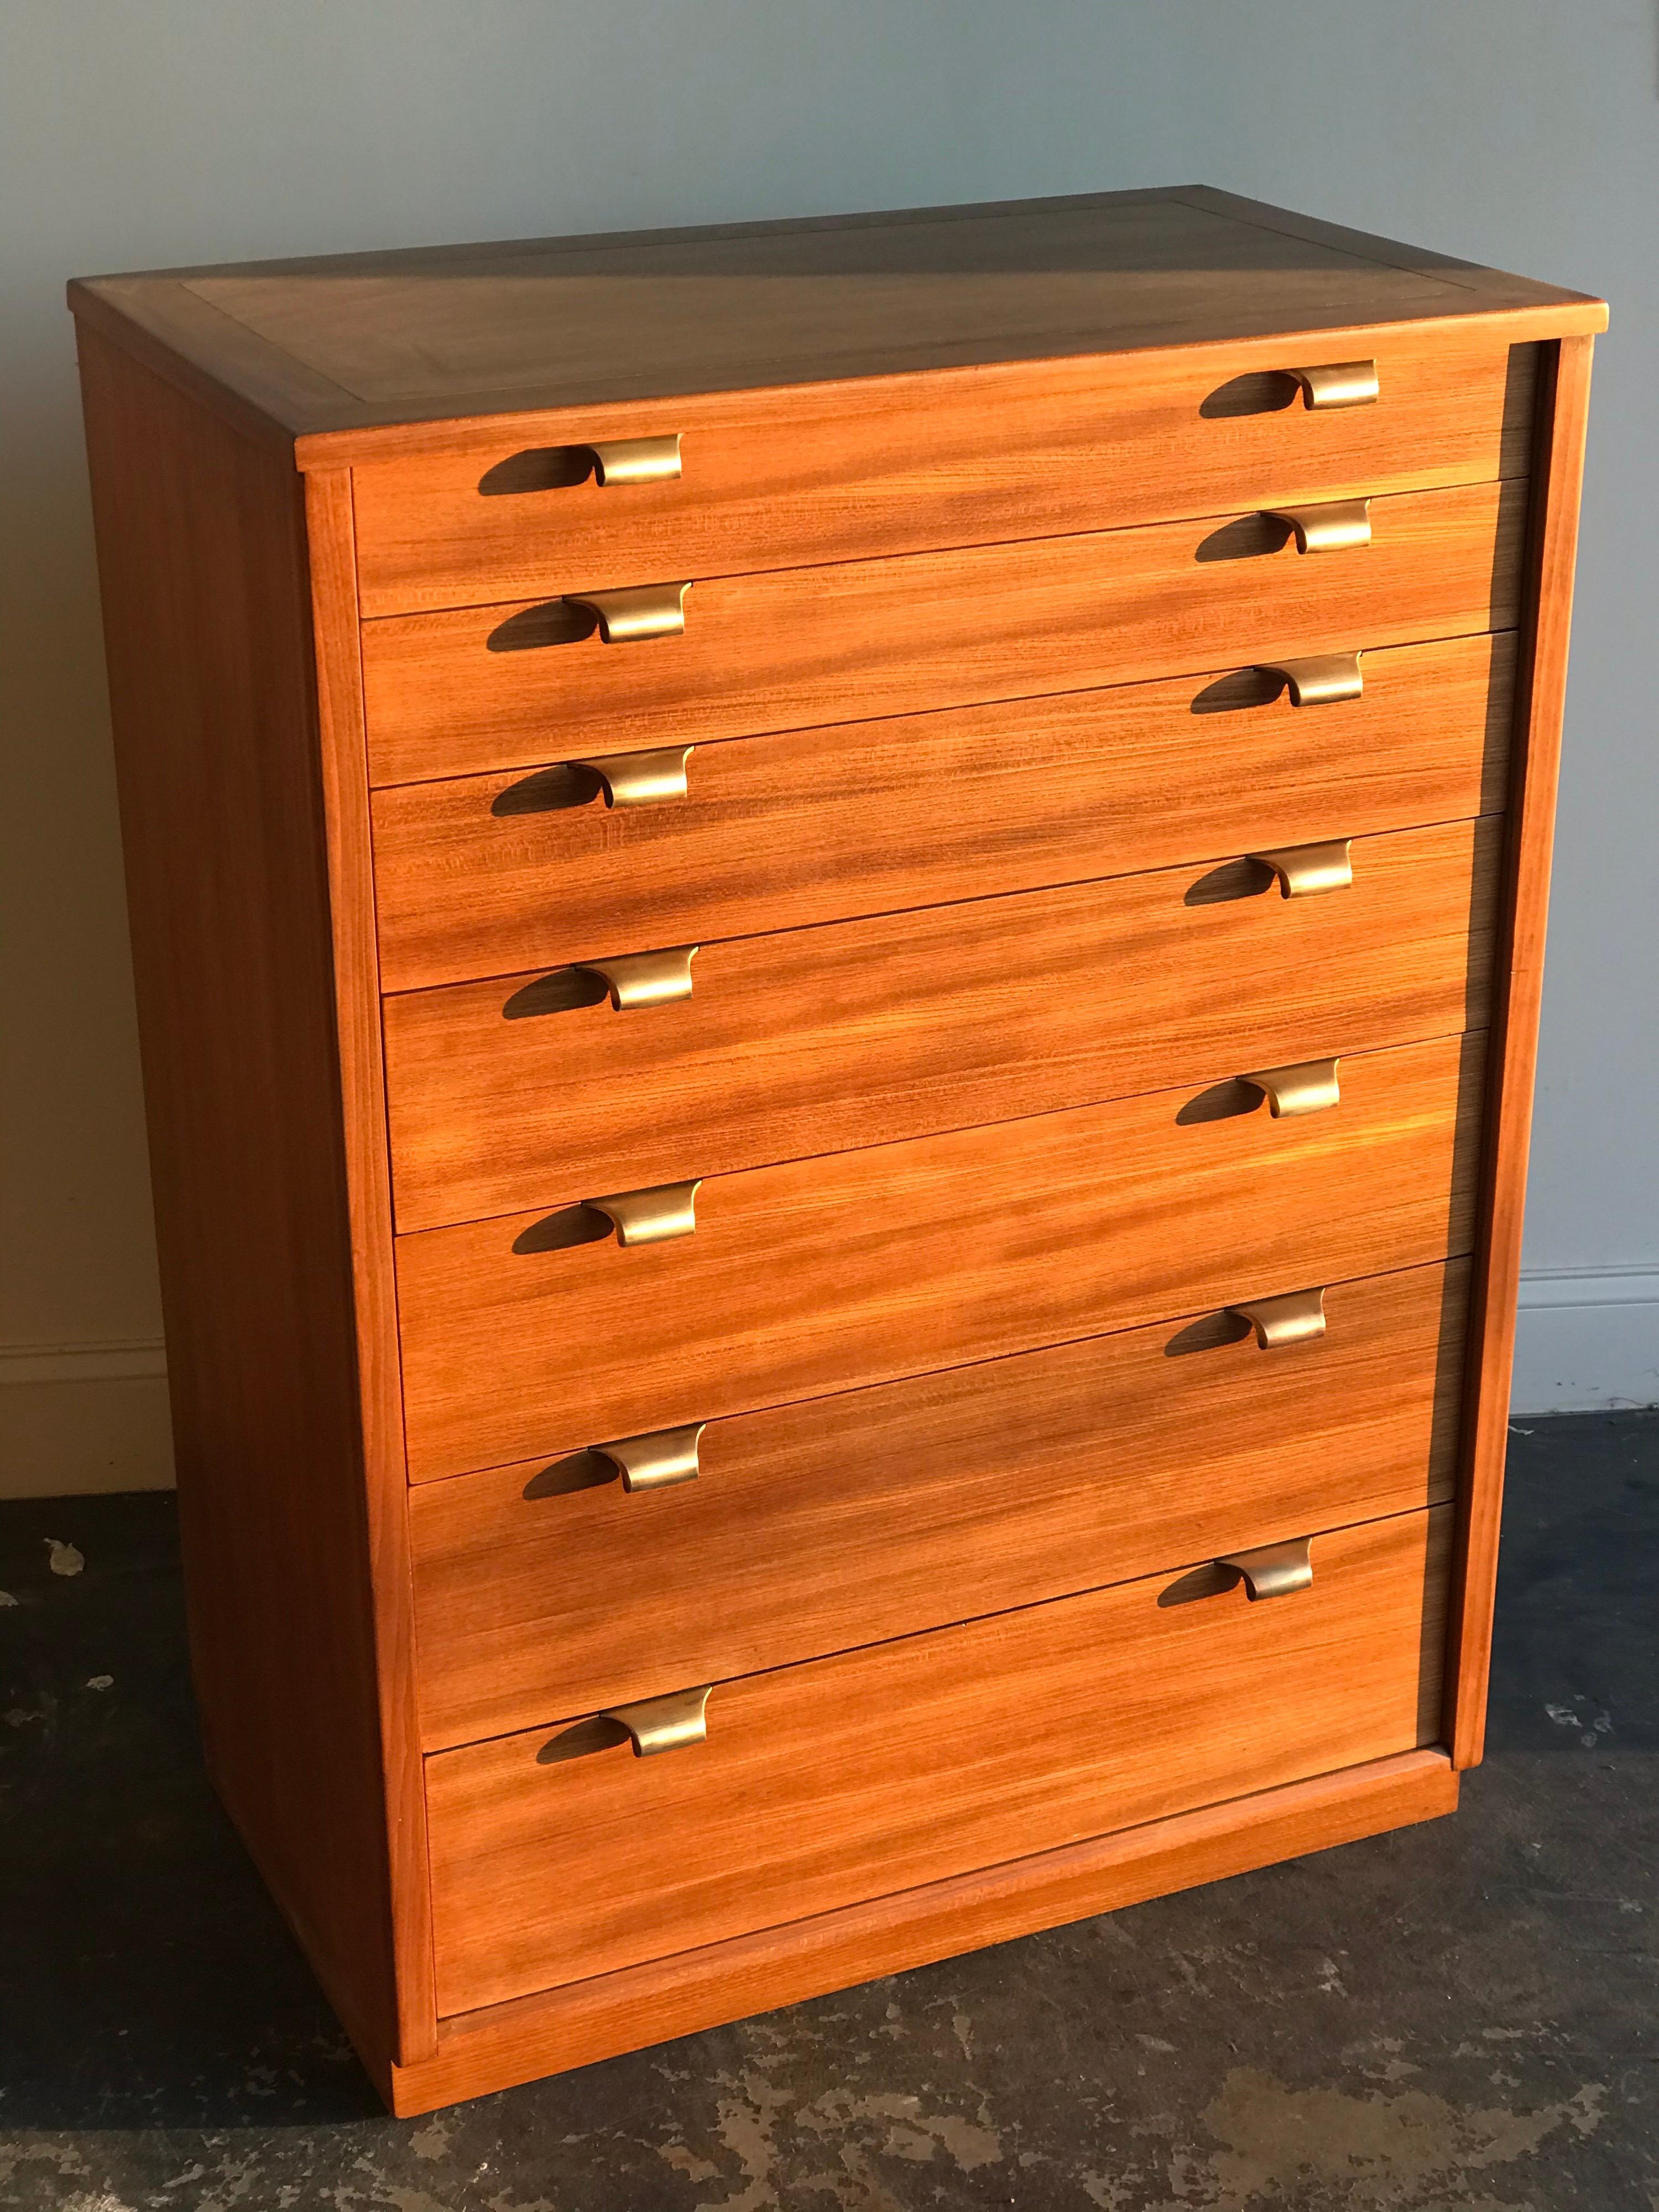 Elegant tall chest of drawers by Edward Wormley for Drexel 